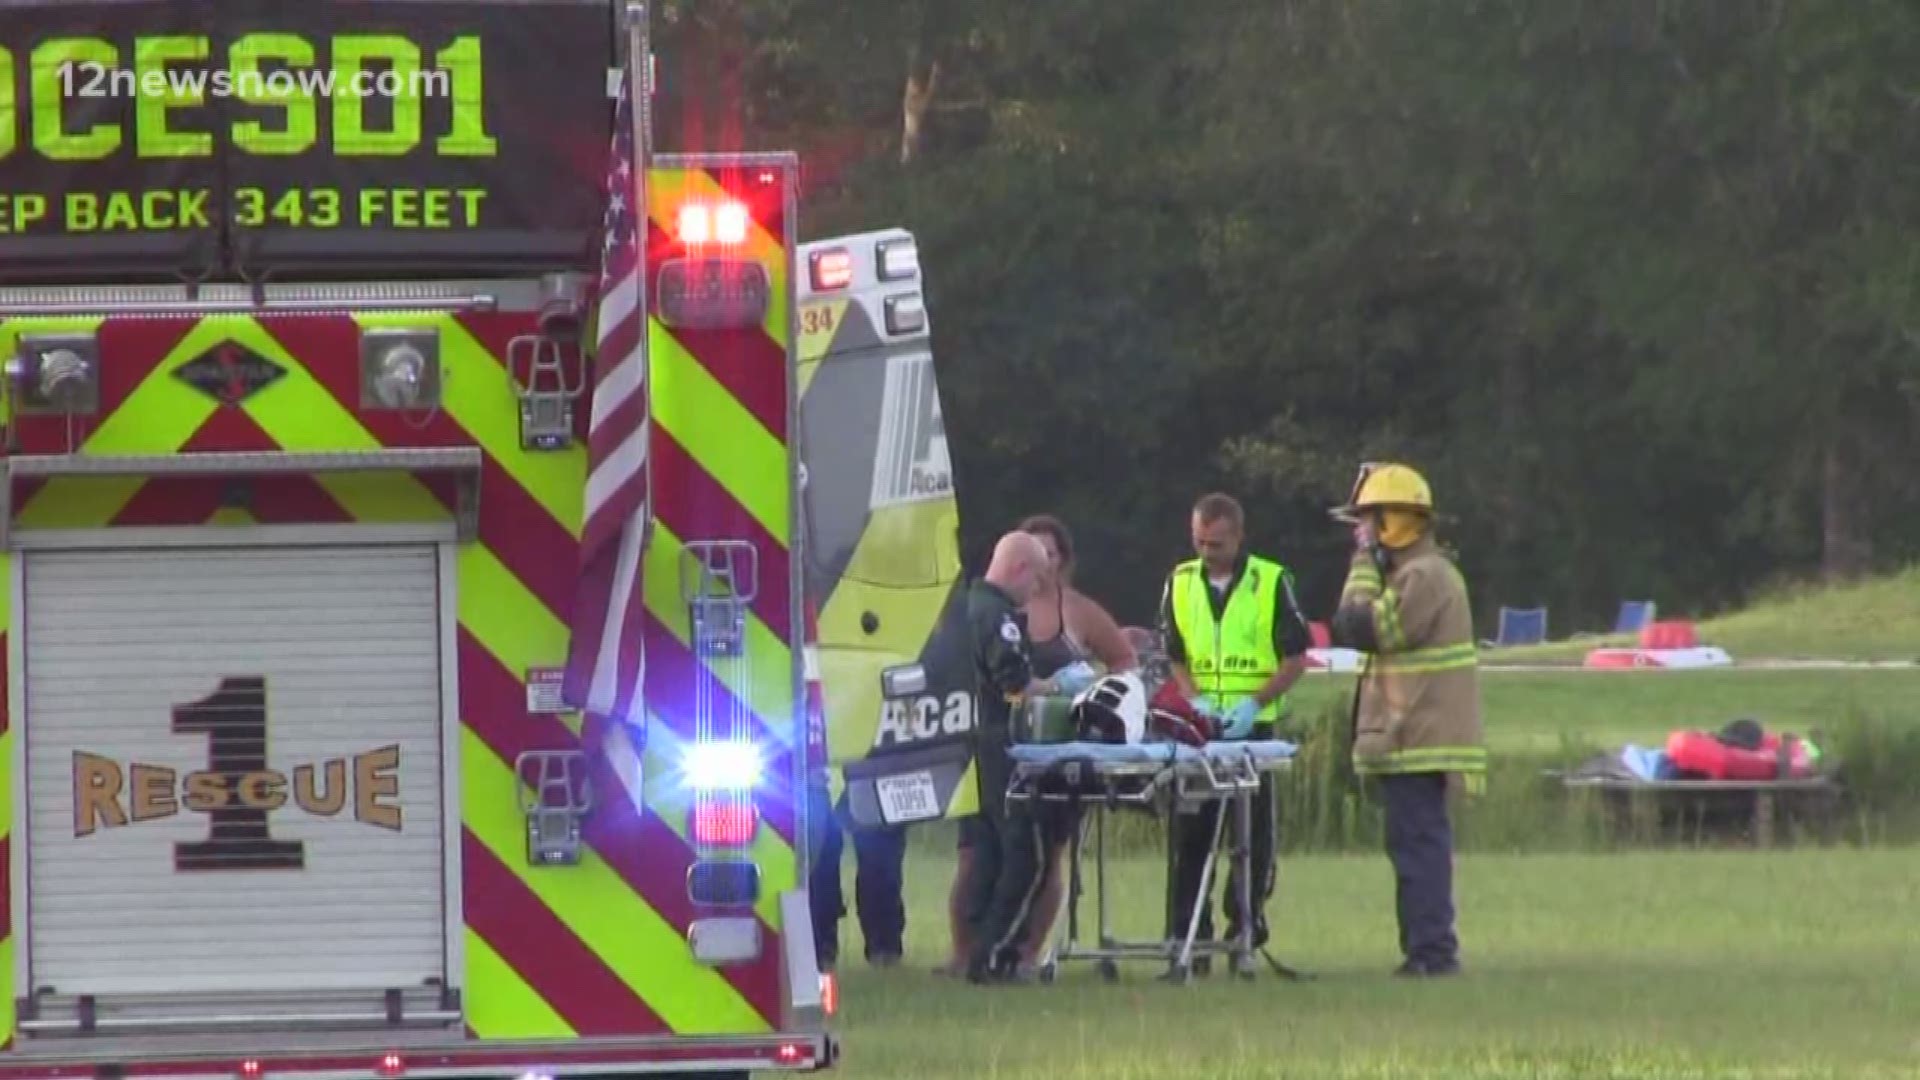 Vidor ATV accident sends woman to hospital via helicopter